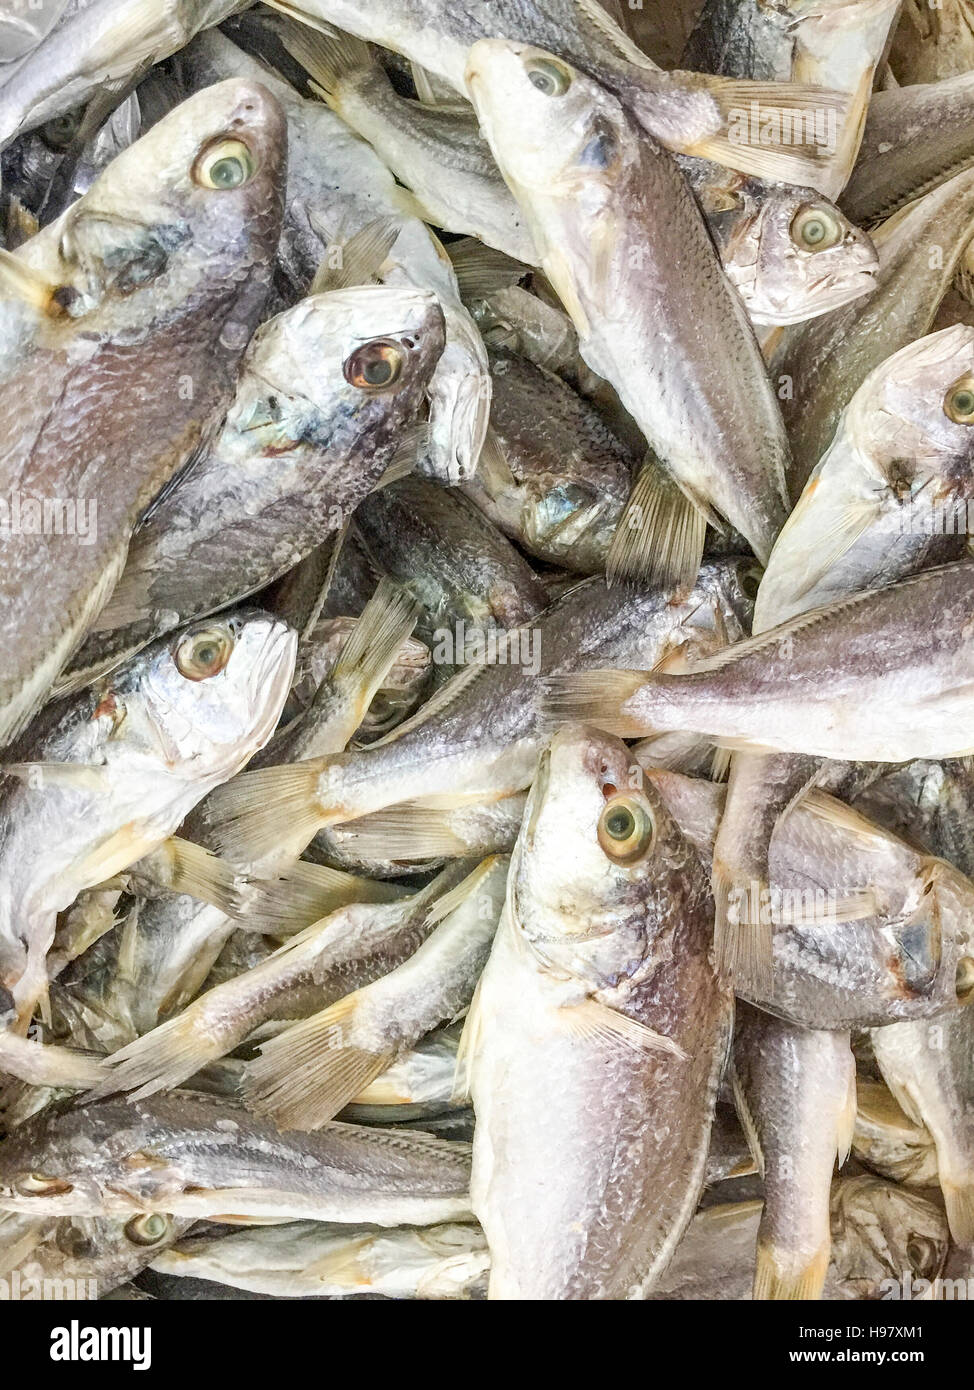 Dried salted fish Pagellus bogaraveo or Red Seabream or local people called Ikan Gelama on display at fish market. Stock Photo